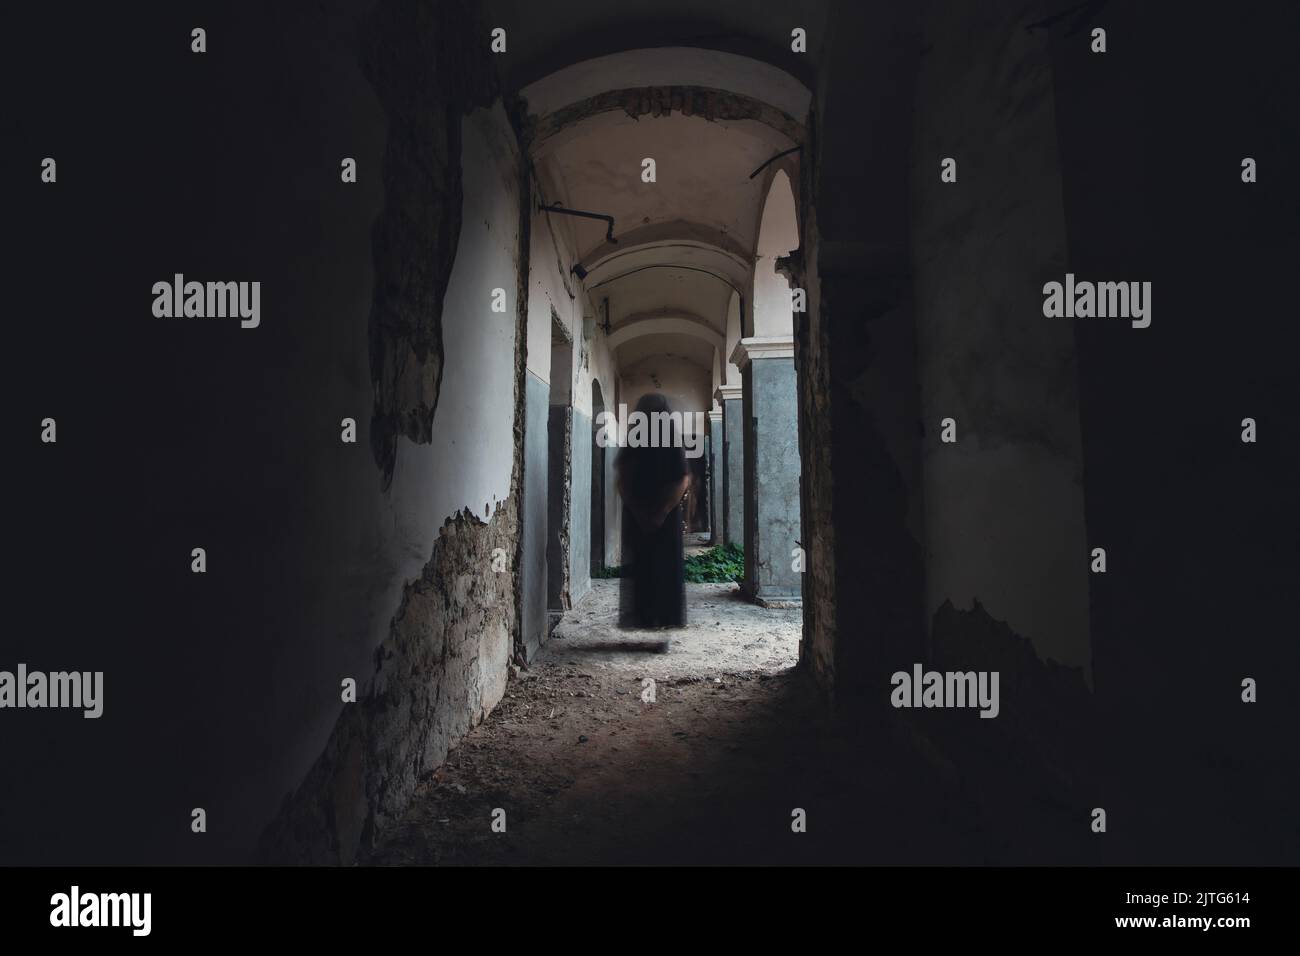 Ghost in abandoned, haunted house. Horror scene of scary spirit of a woman, halloween concept. Stock Photo